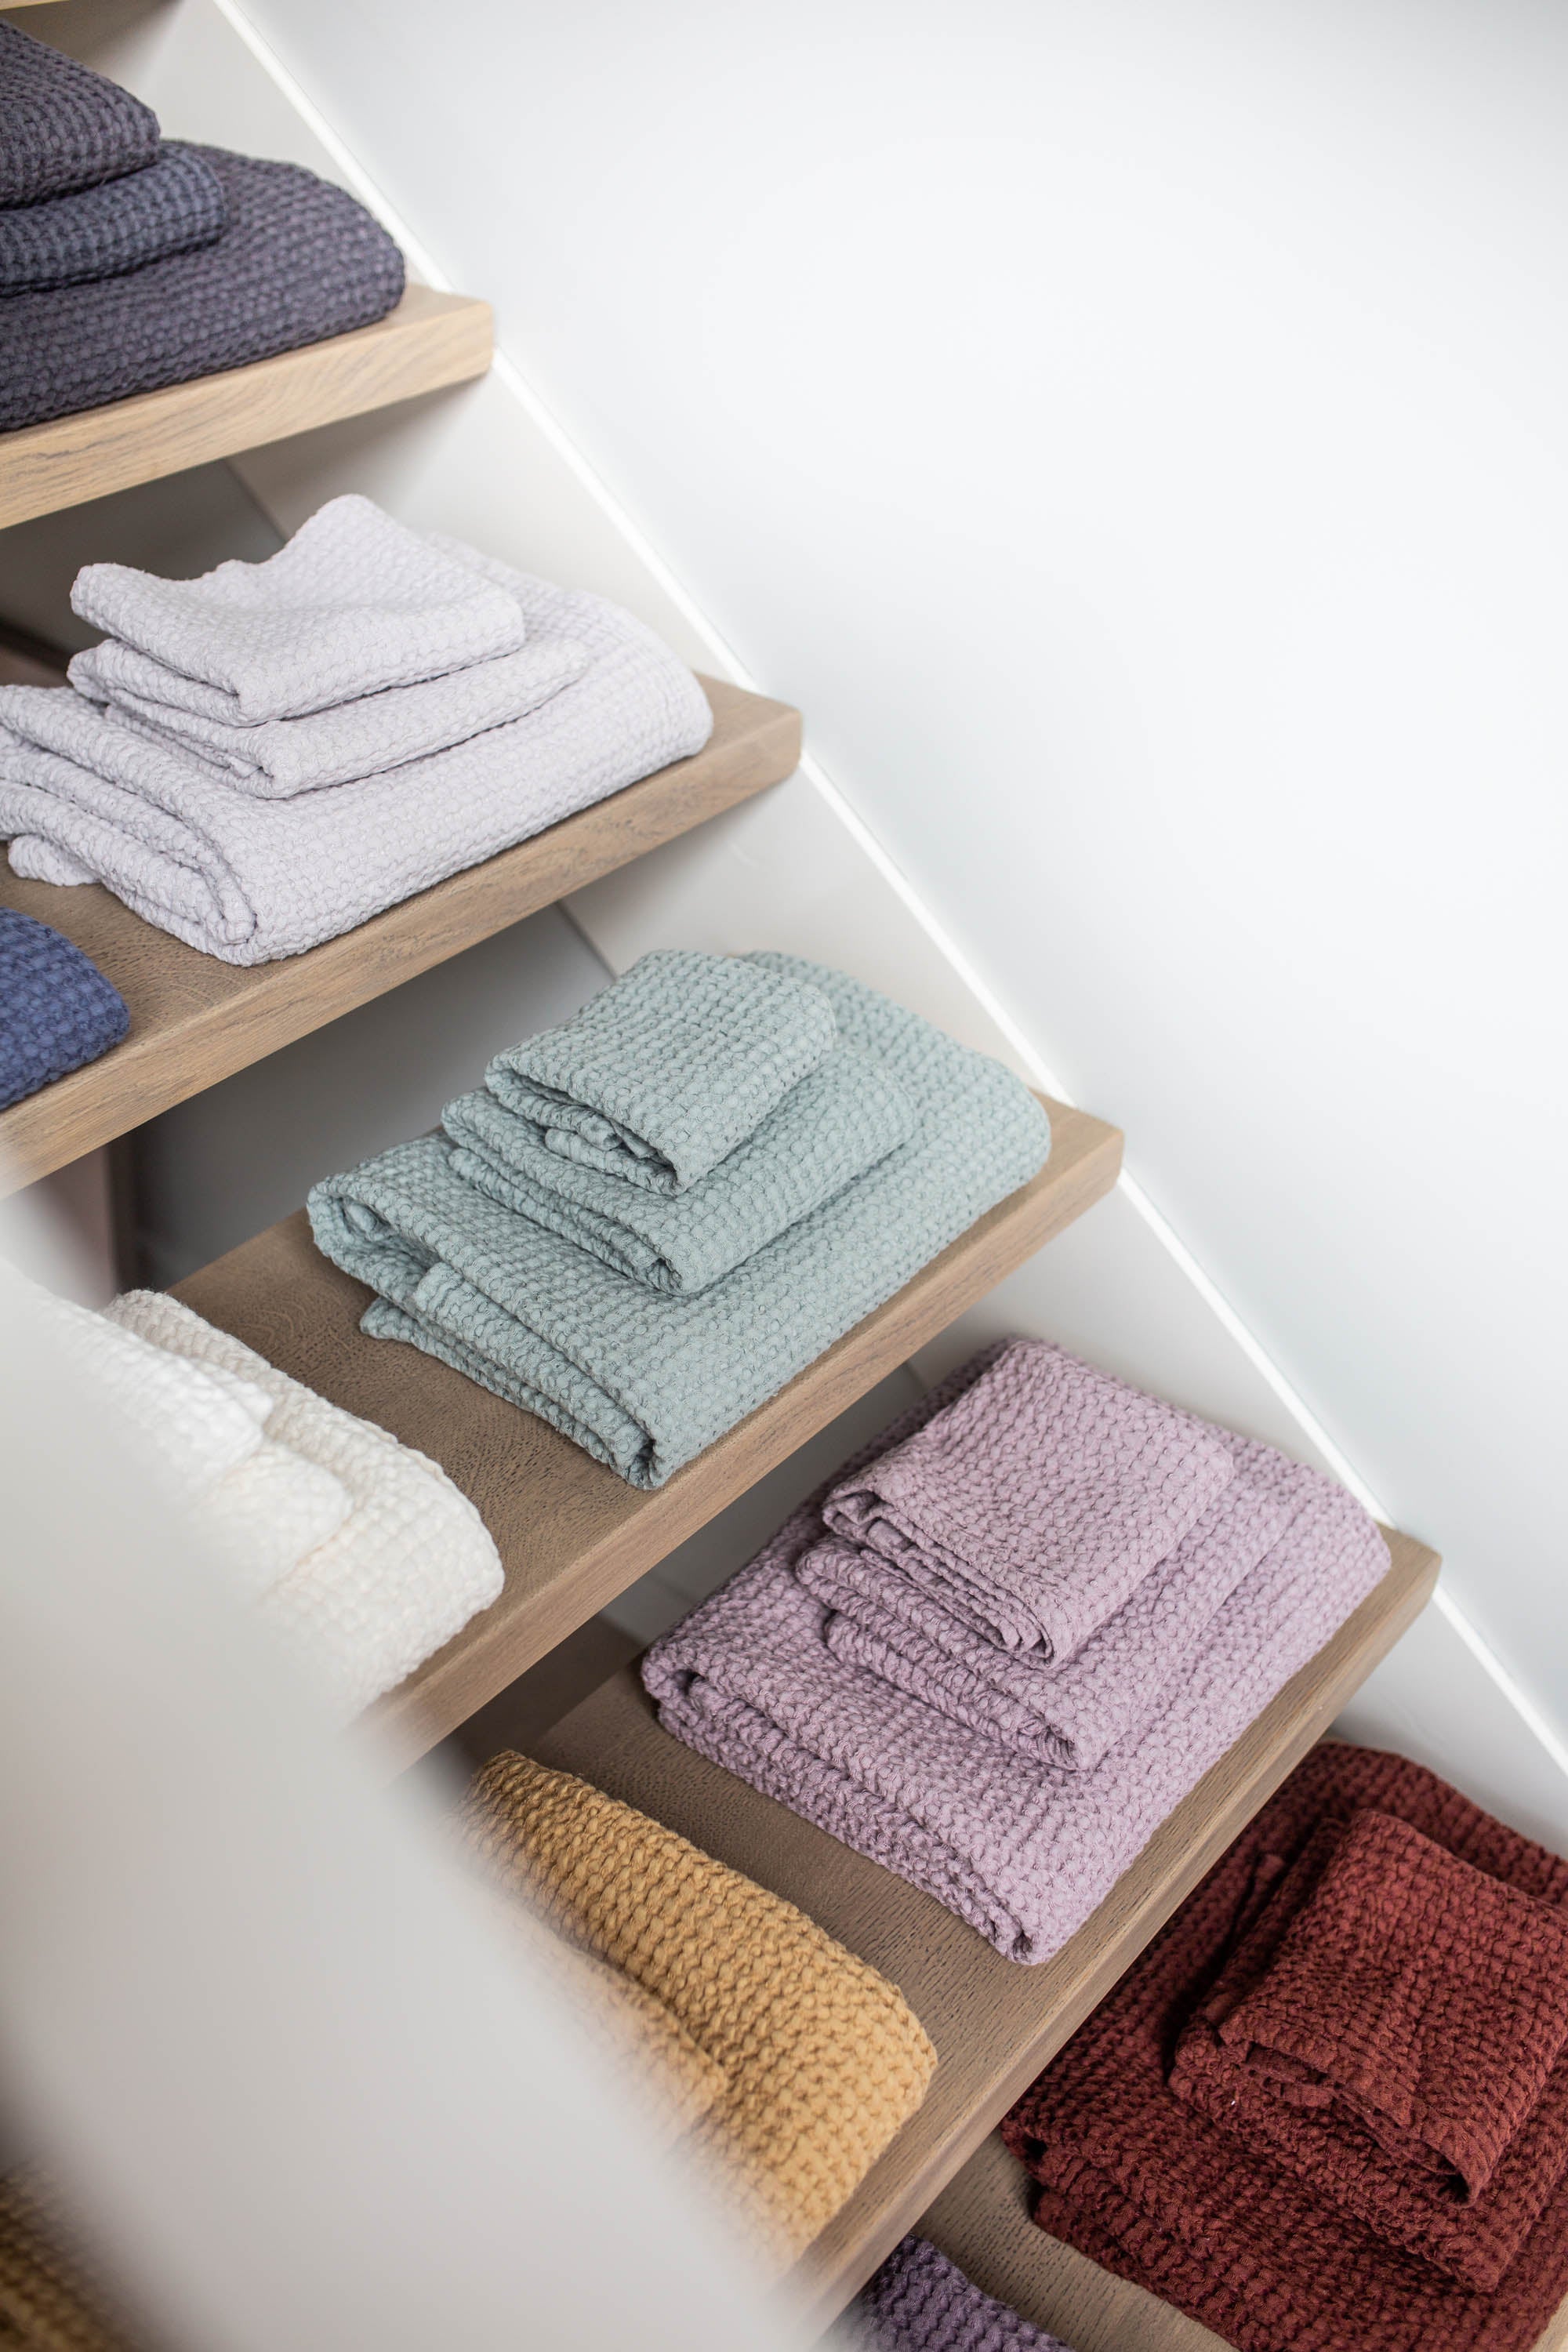 How to pick out the best waffle towels and other linen products online?